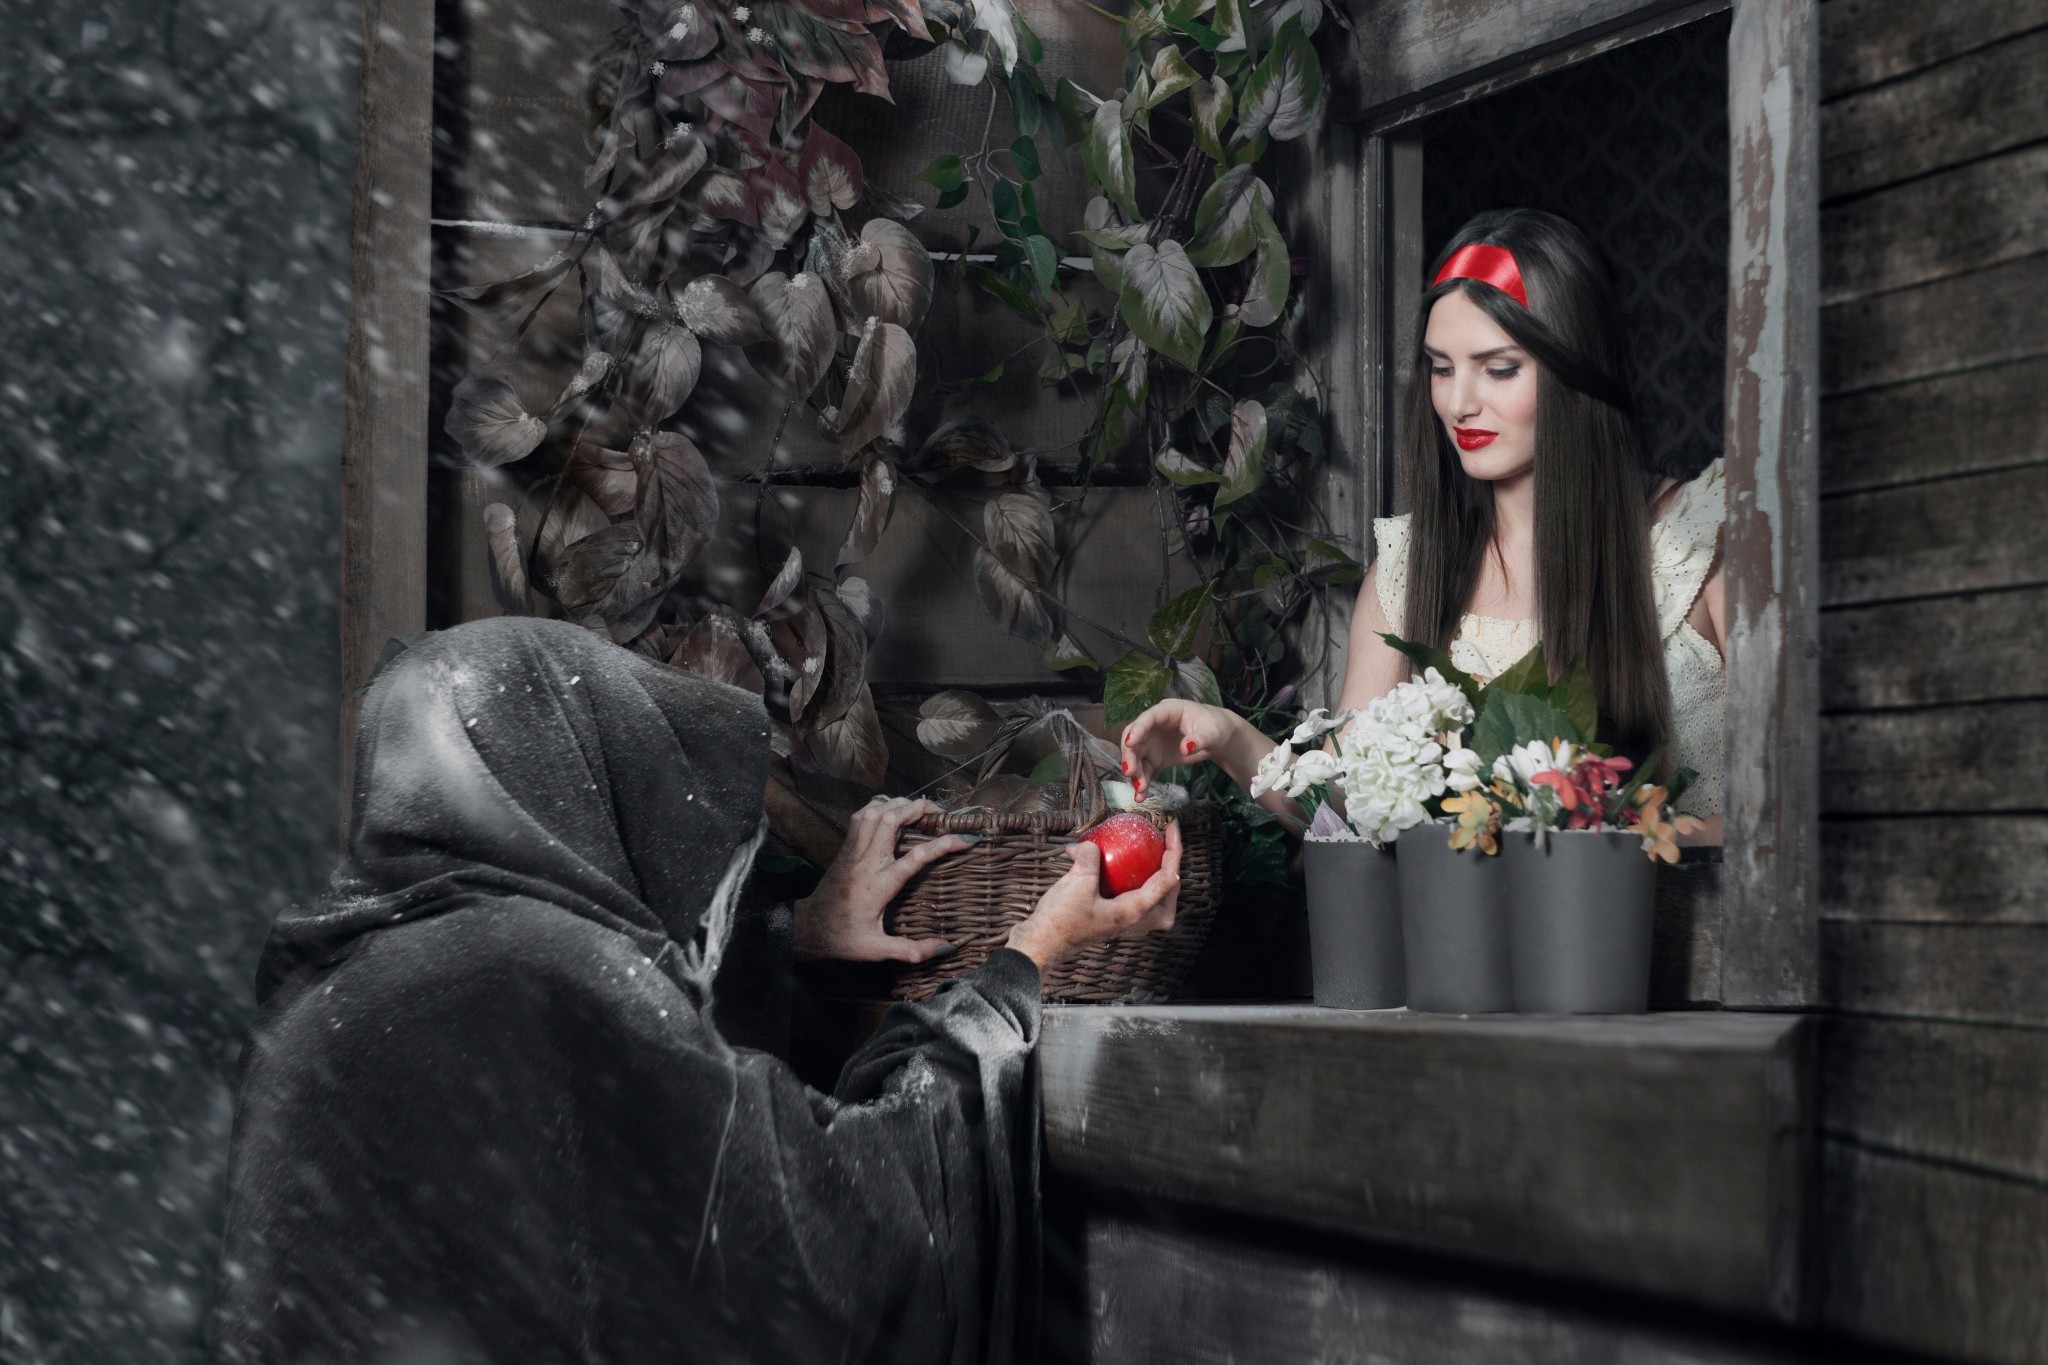 General 2048x1365 fairy tale witch Snow White fantasy girl food fruit apples makeup red lipstick red nails painted nails women model